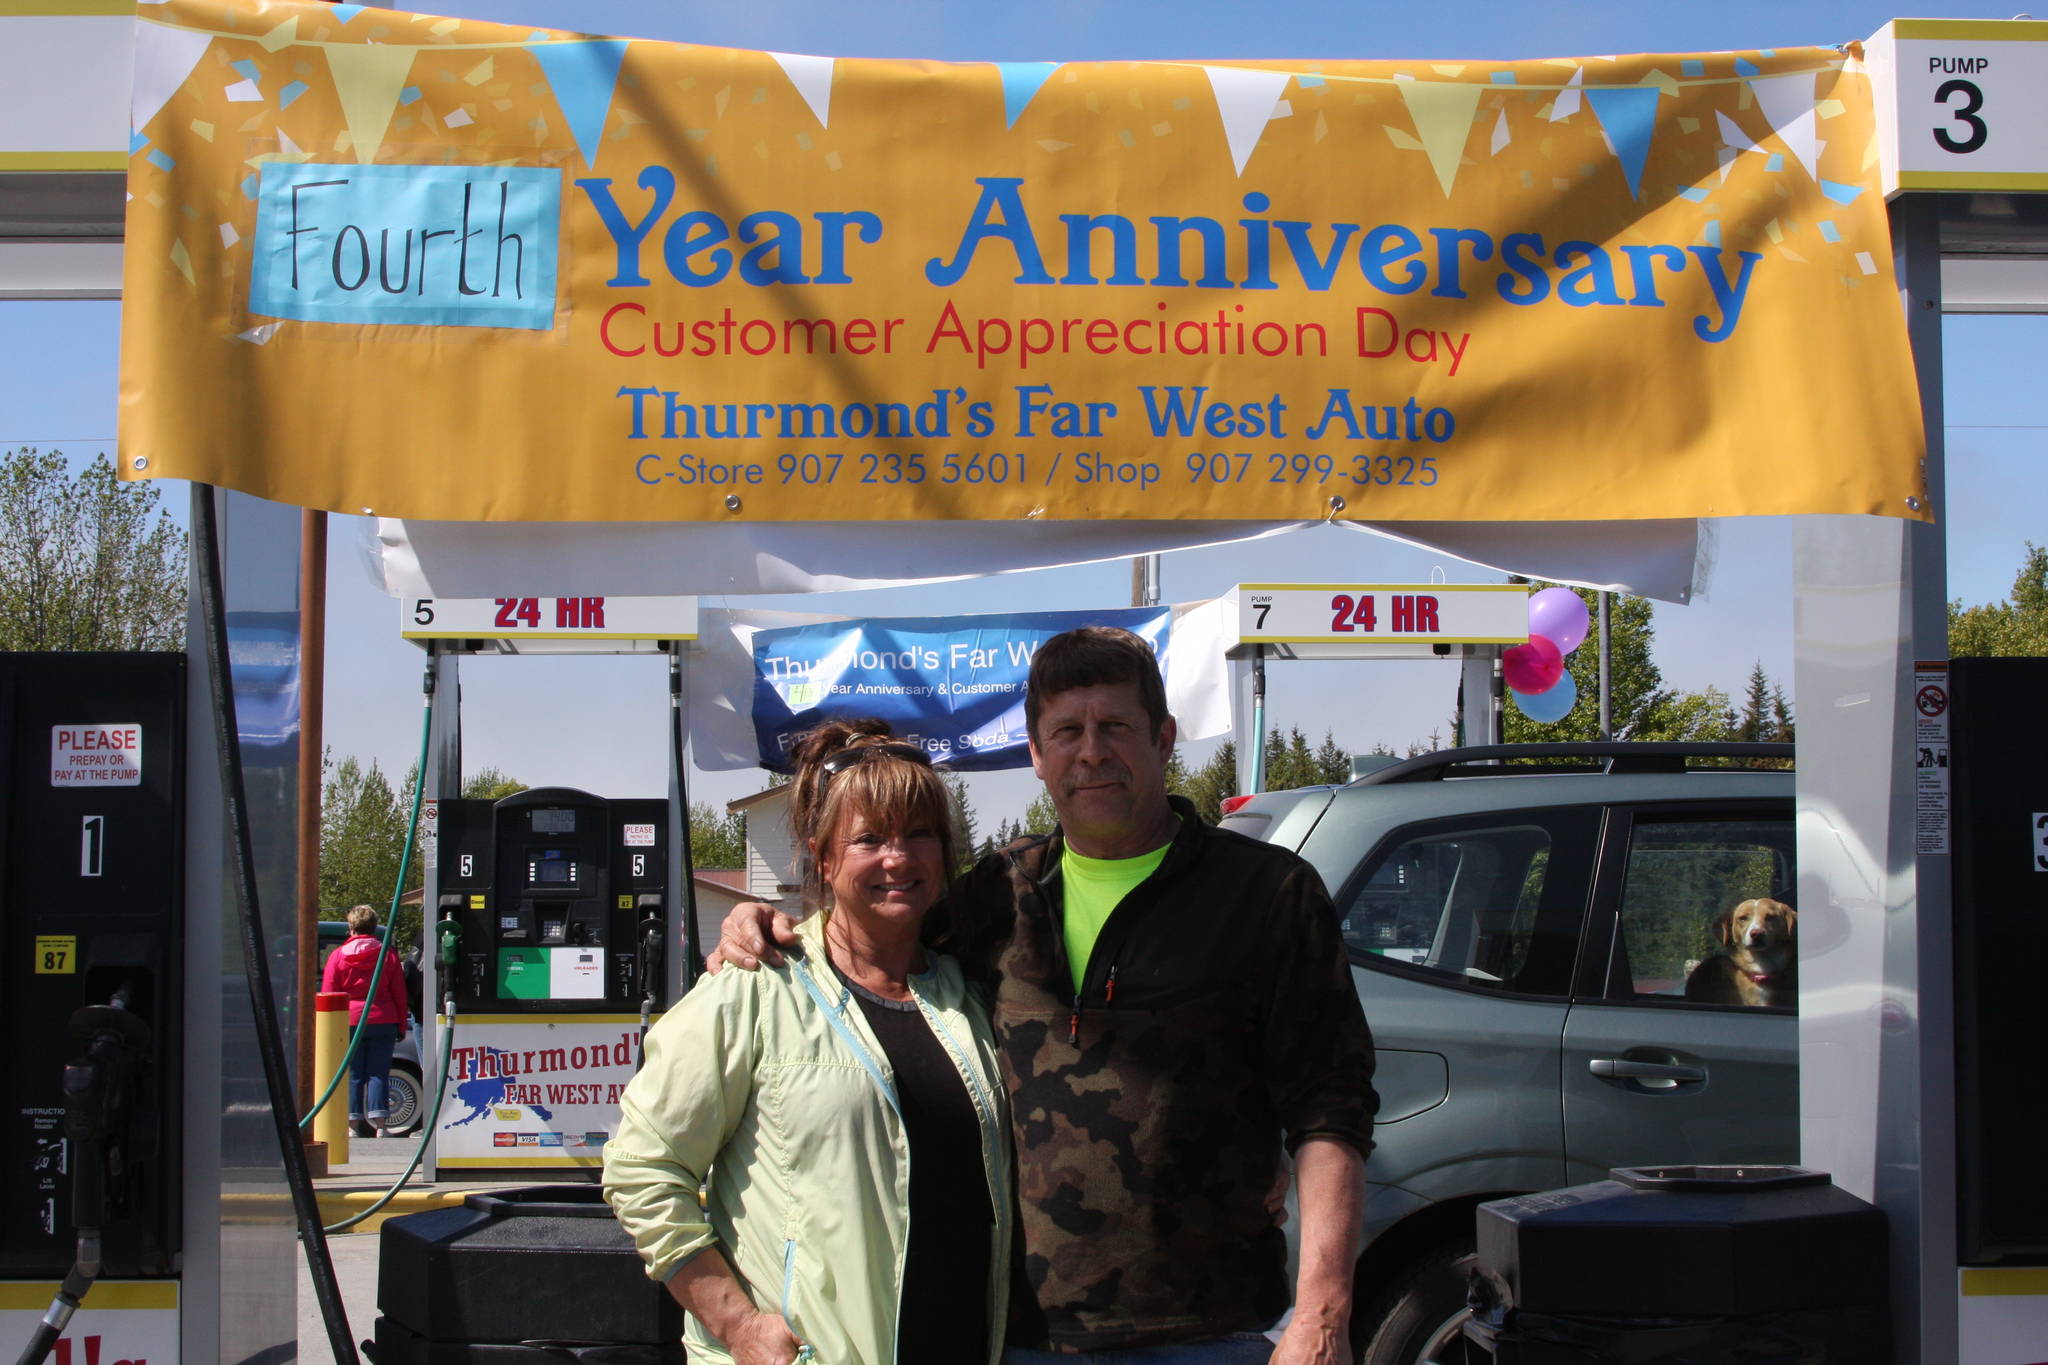 Photo by Delcenia Cosman Owner Elaine Griner and her husband Dale celebrate Thurmond’s Far West Auto’s fourth anniversary and Customer Appreciation Day on Saturday, June 9 in Anchor Point.